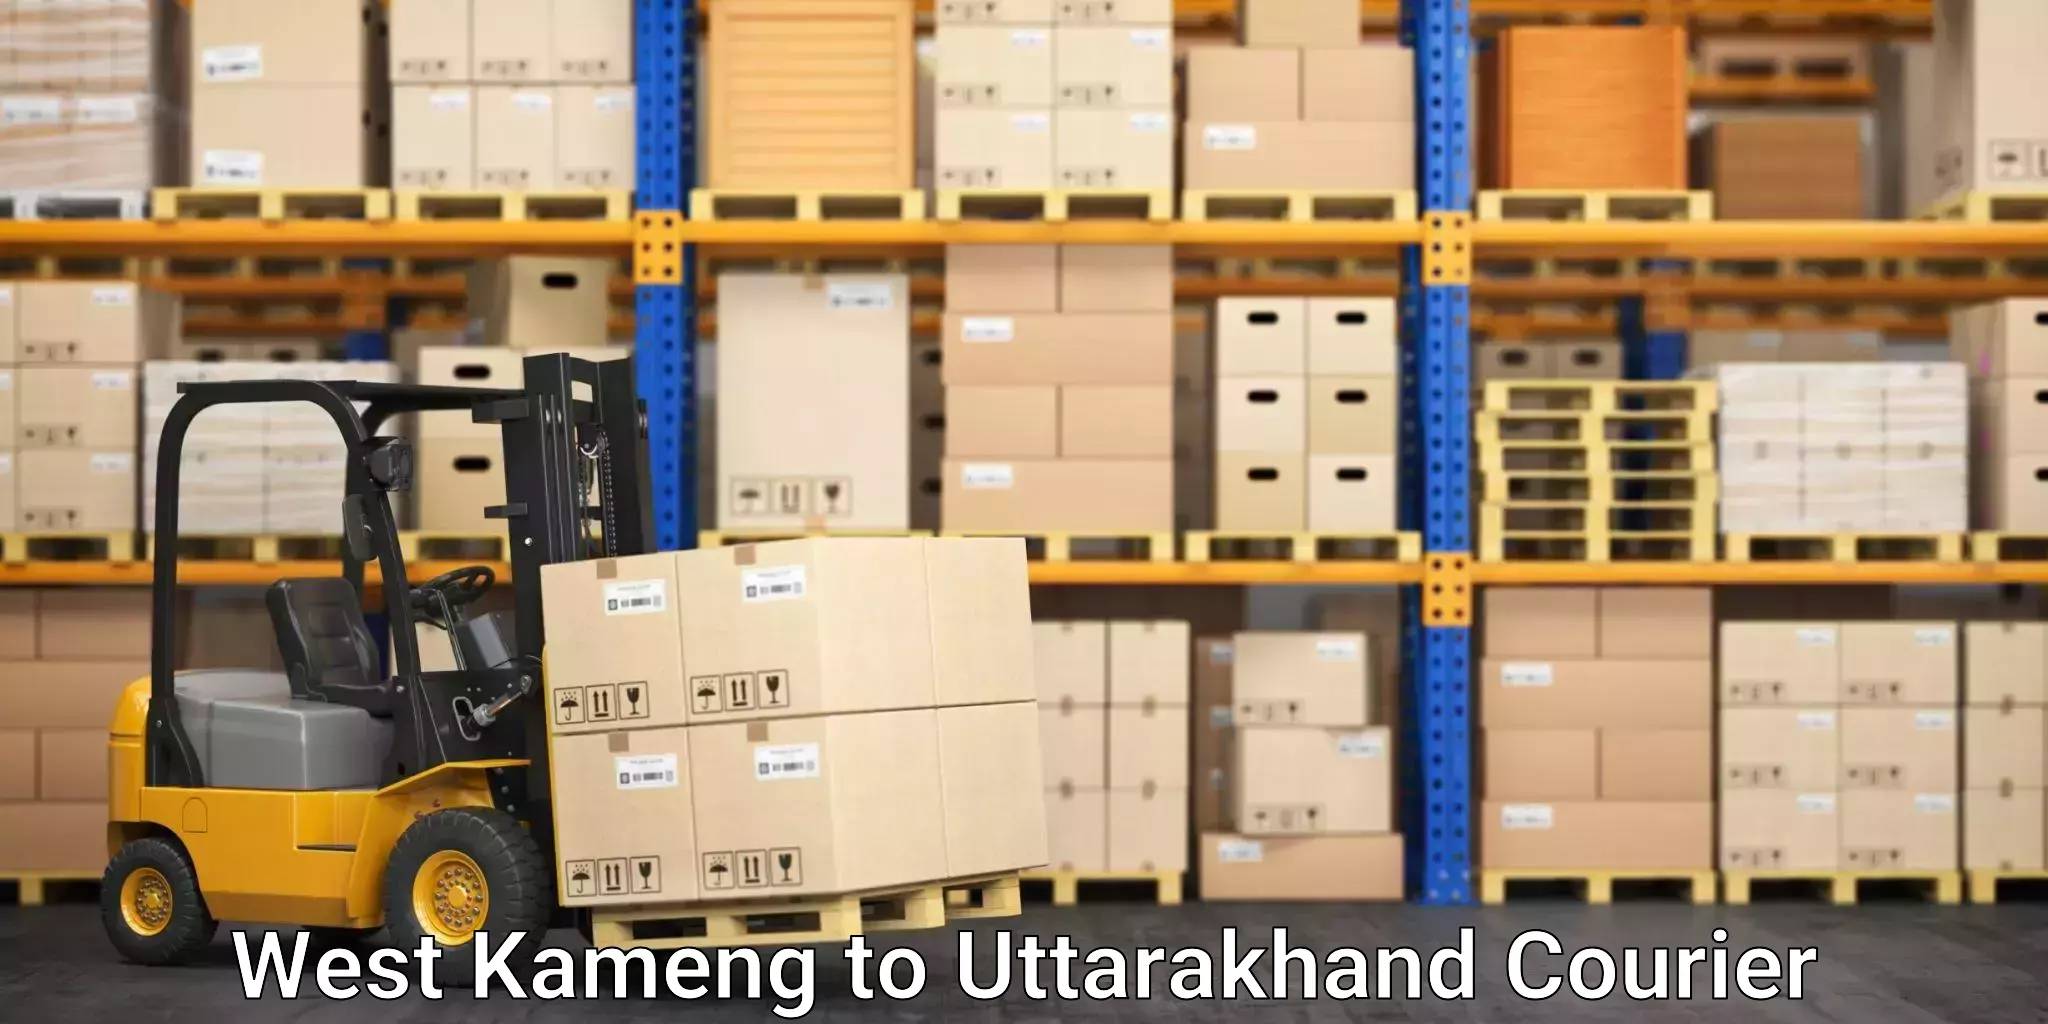 Personal parcel delivery in West Kameng to Uttarakhand